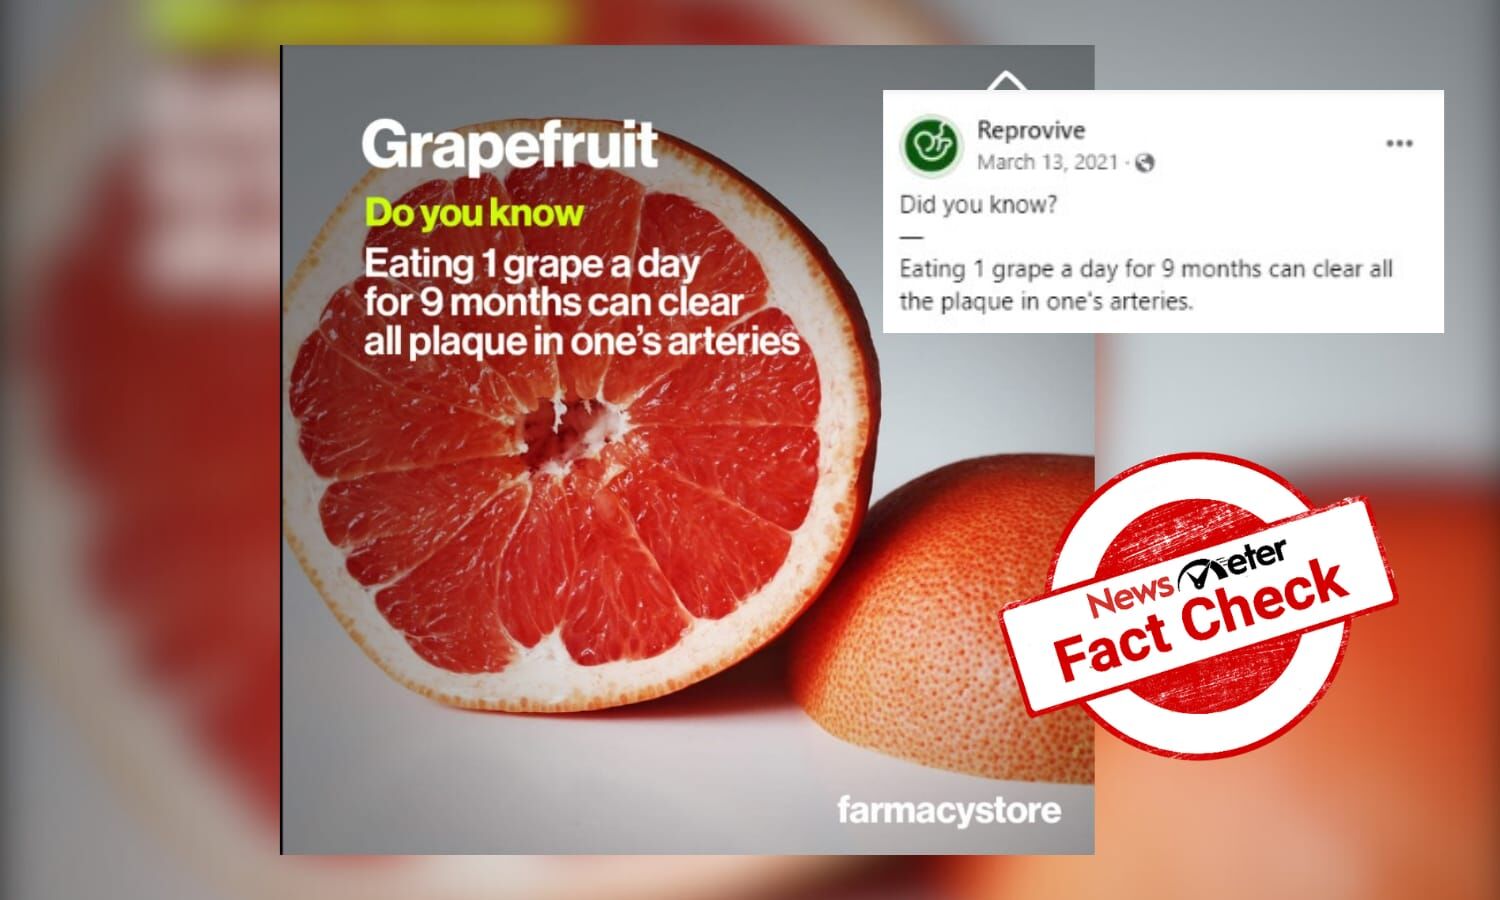 Fact Check: Does consuming grapefruit clear plaque in the artery?